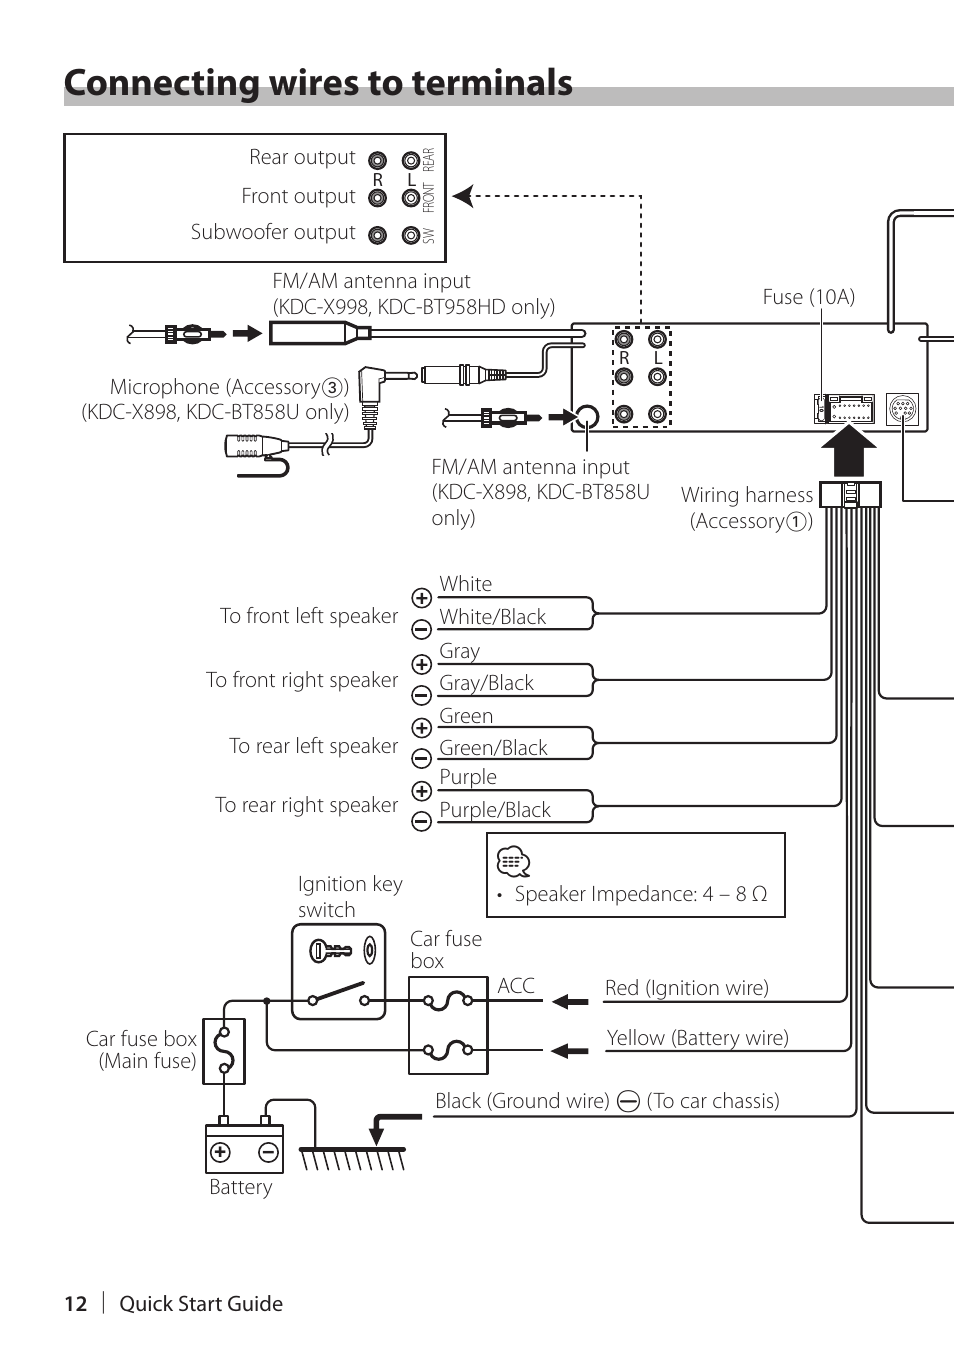 Connecting wires to terminals | Kenwood KDC-X898 User Manual | Page 12 / 48